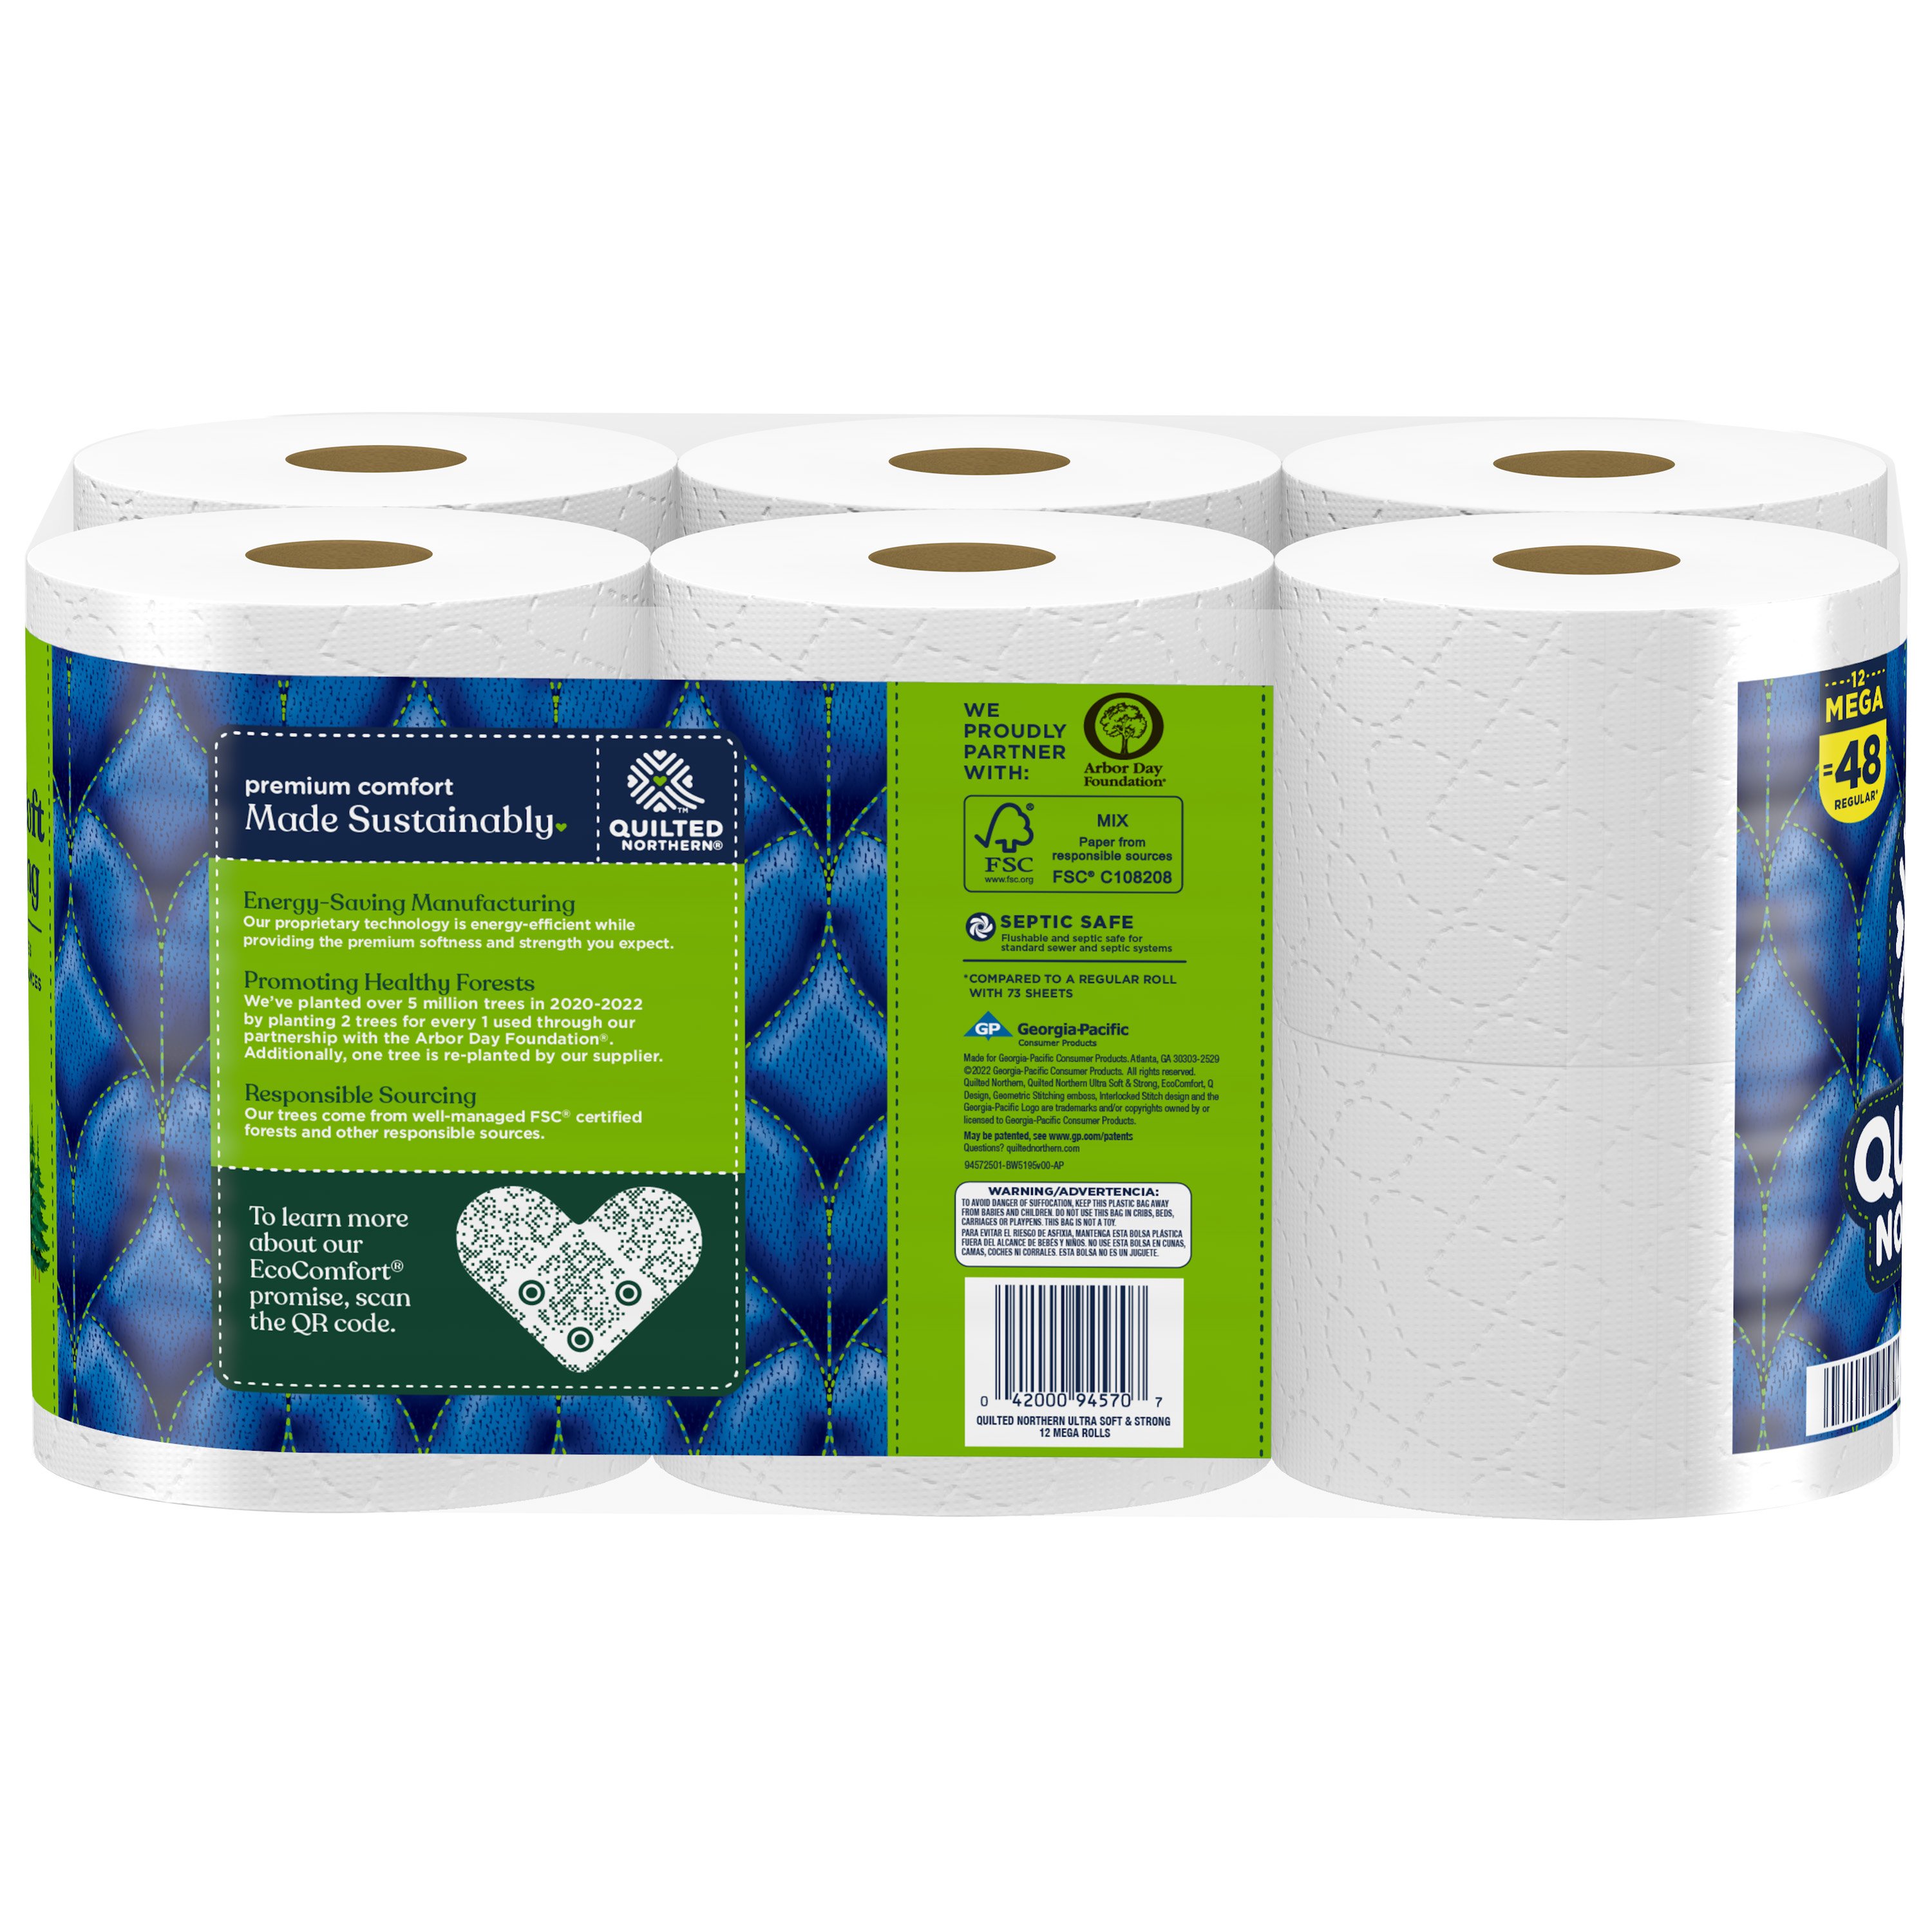 Quilted Northern Ultra Soft & Strong Bathroom Tissue, Unscented, Mega Roll,  2-Ply, Toilet Paper